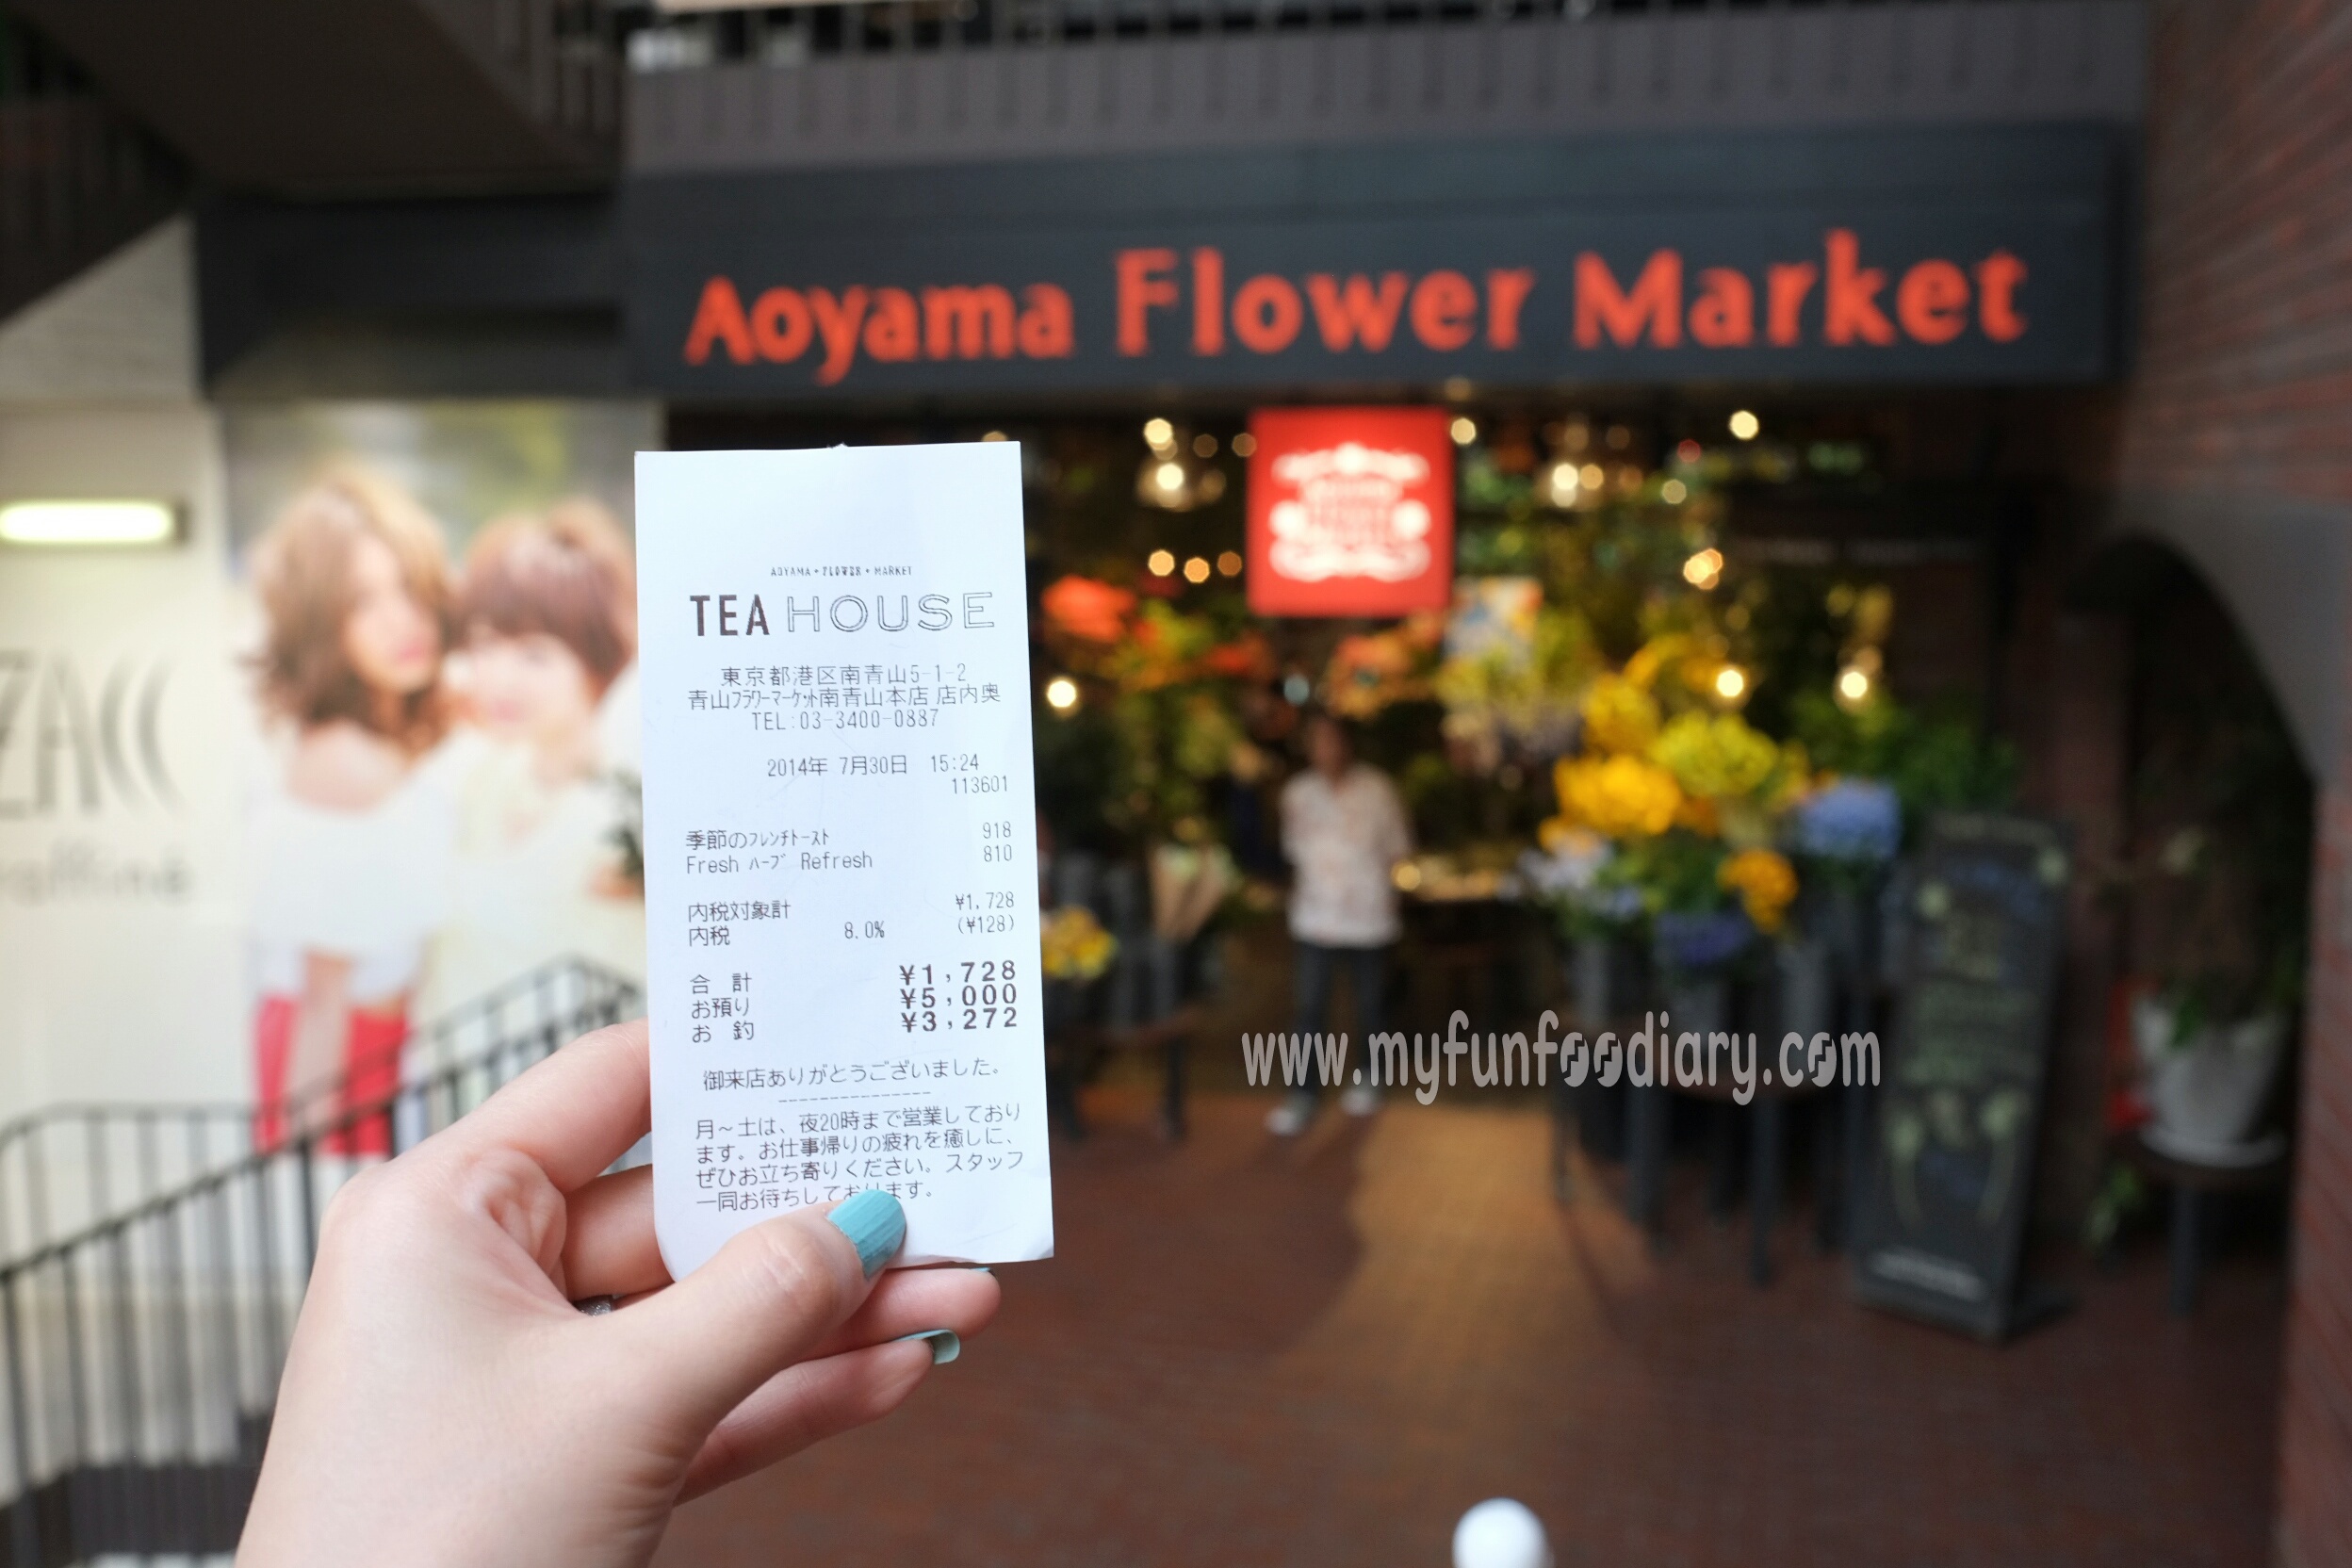 Expenses at Aoyama Flower Market in Tokyo Japan by Myfunfoodiary